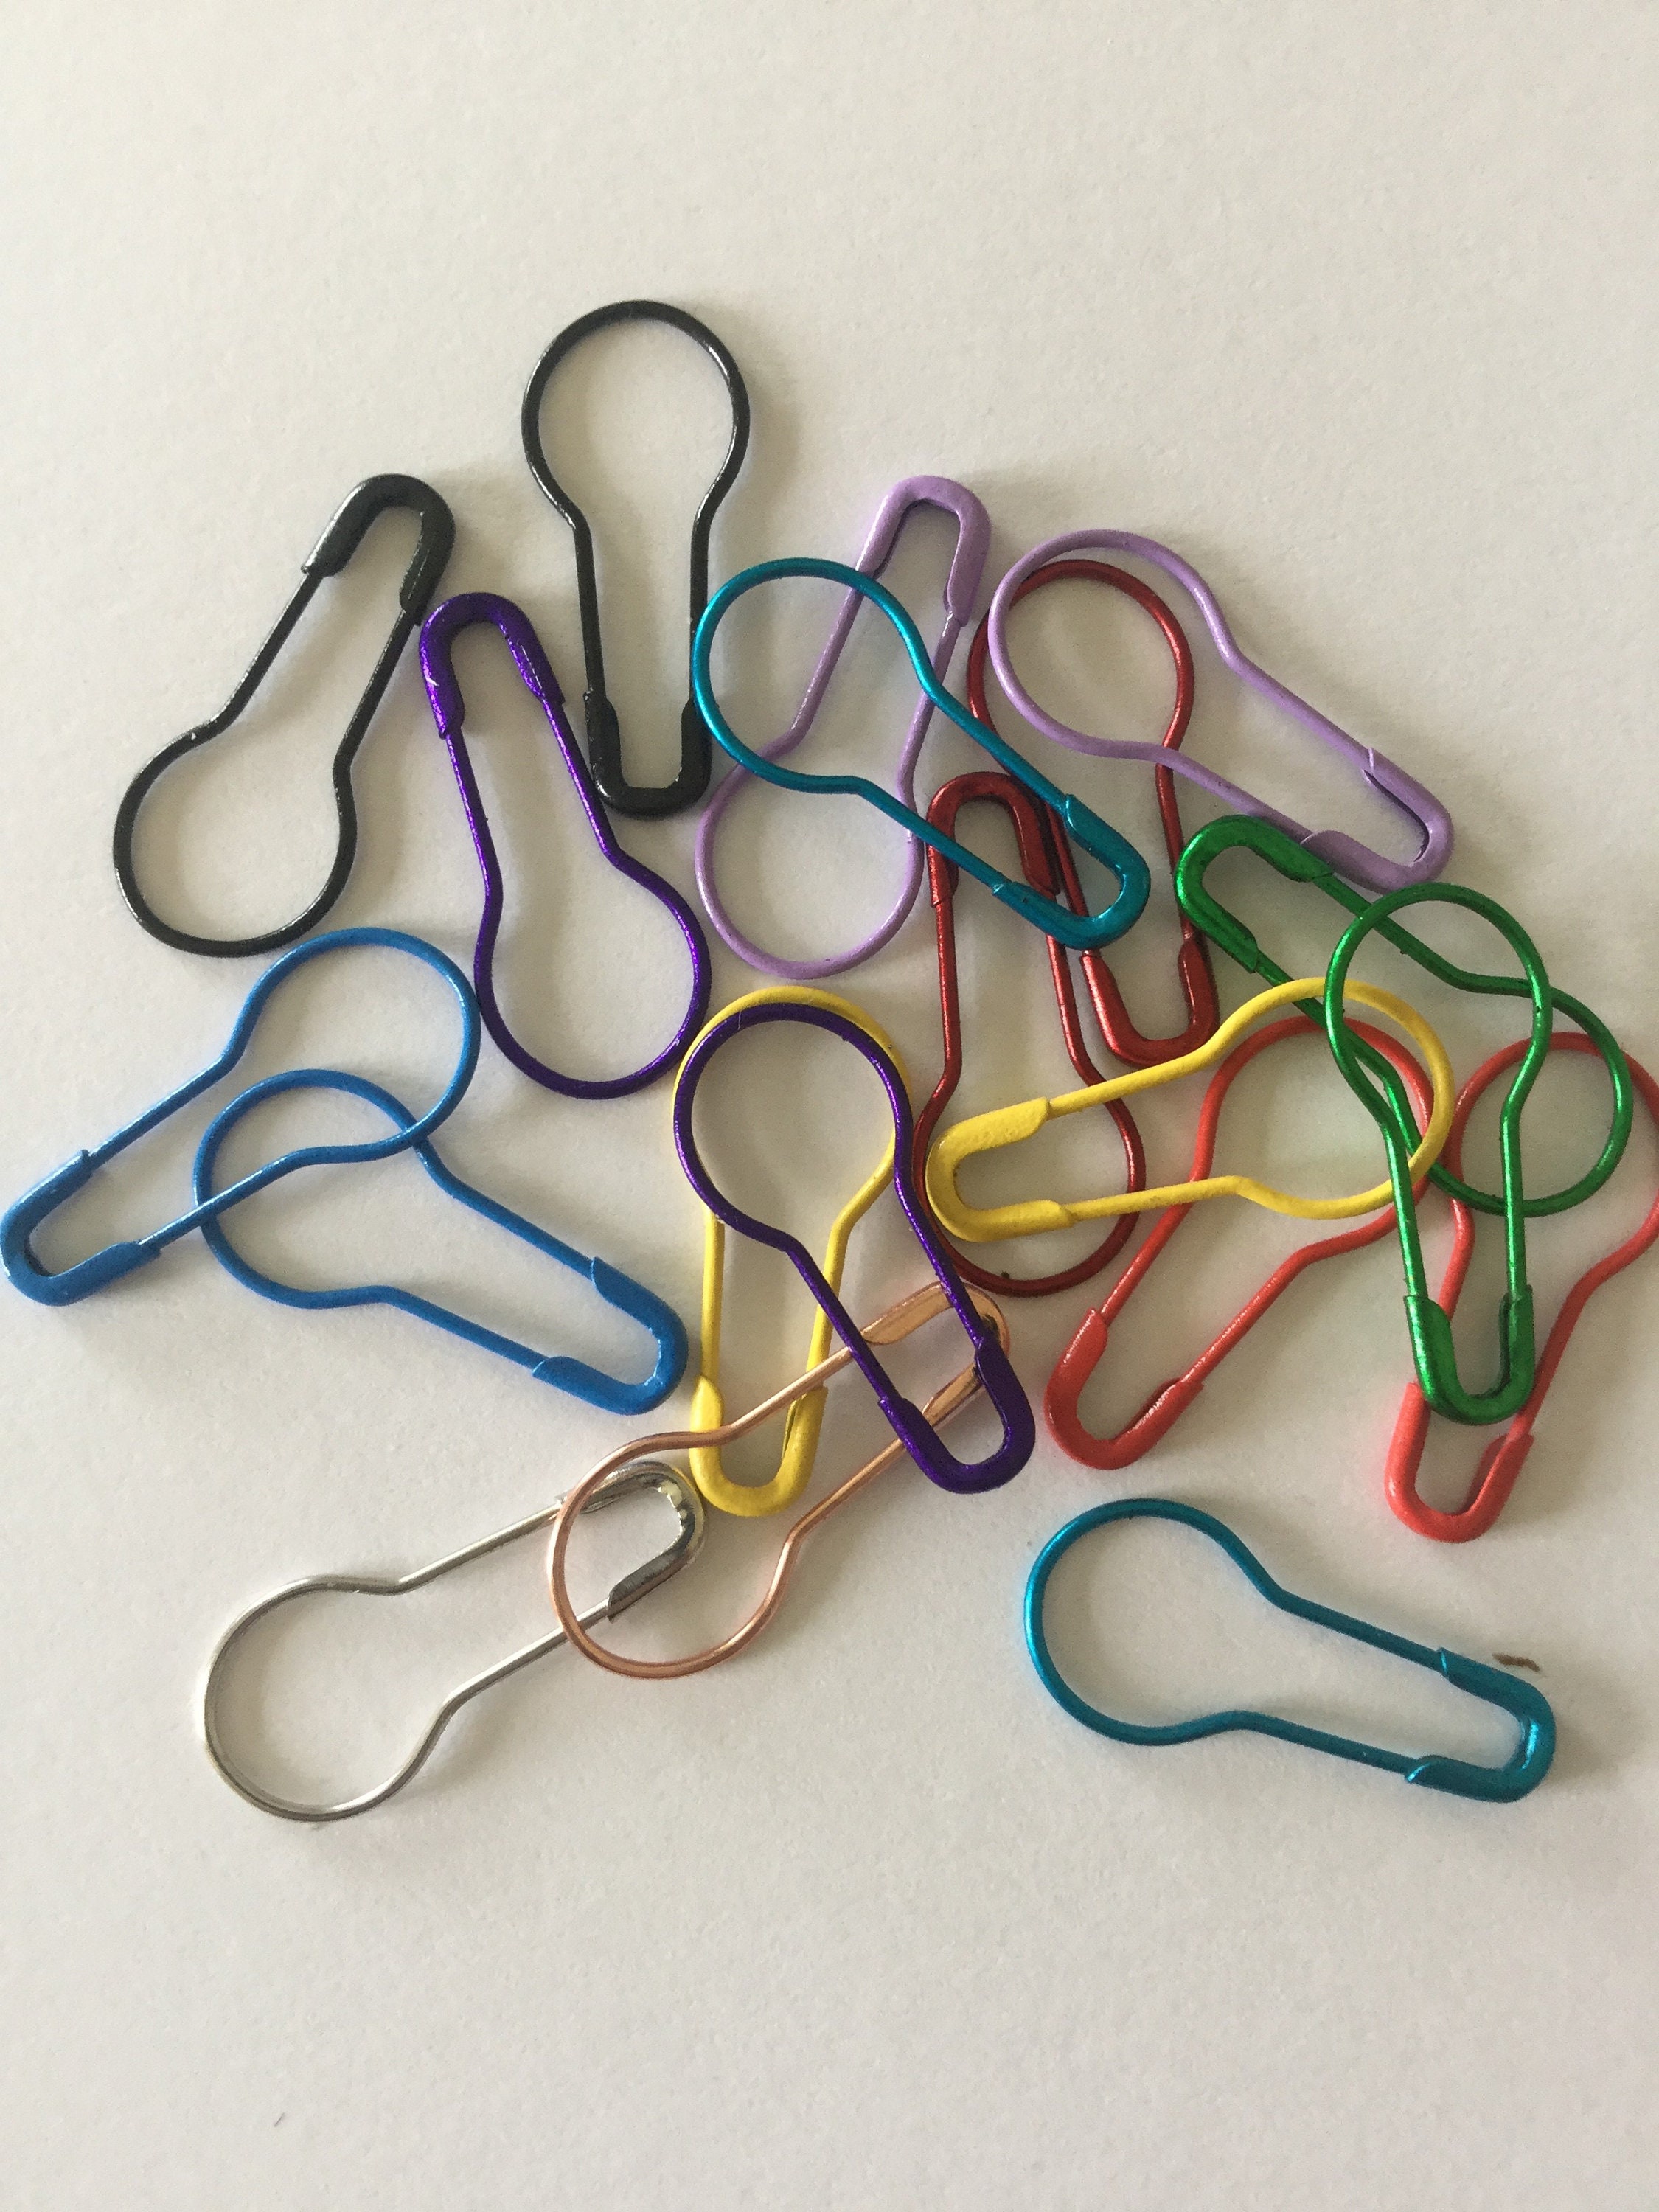 safety pins ,100pcs Colorful Safety Pins, safety pin brooch,safety pins  metal ,Price Tag Jewelry Tag,Stitch Markers Safety Pins 30x6mm